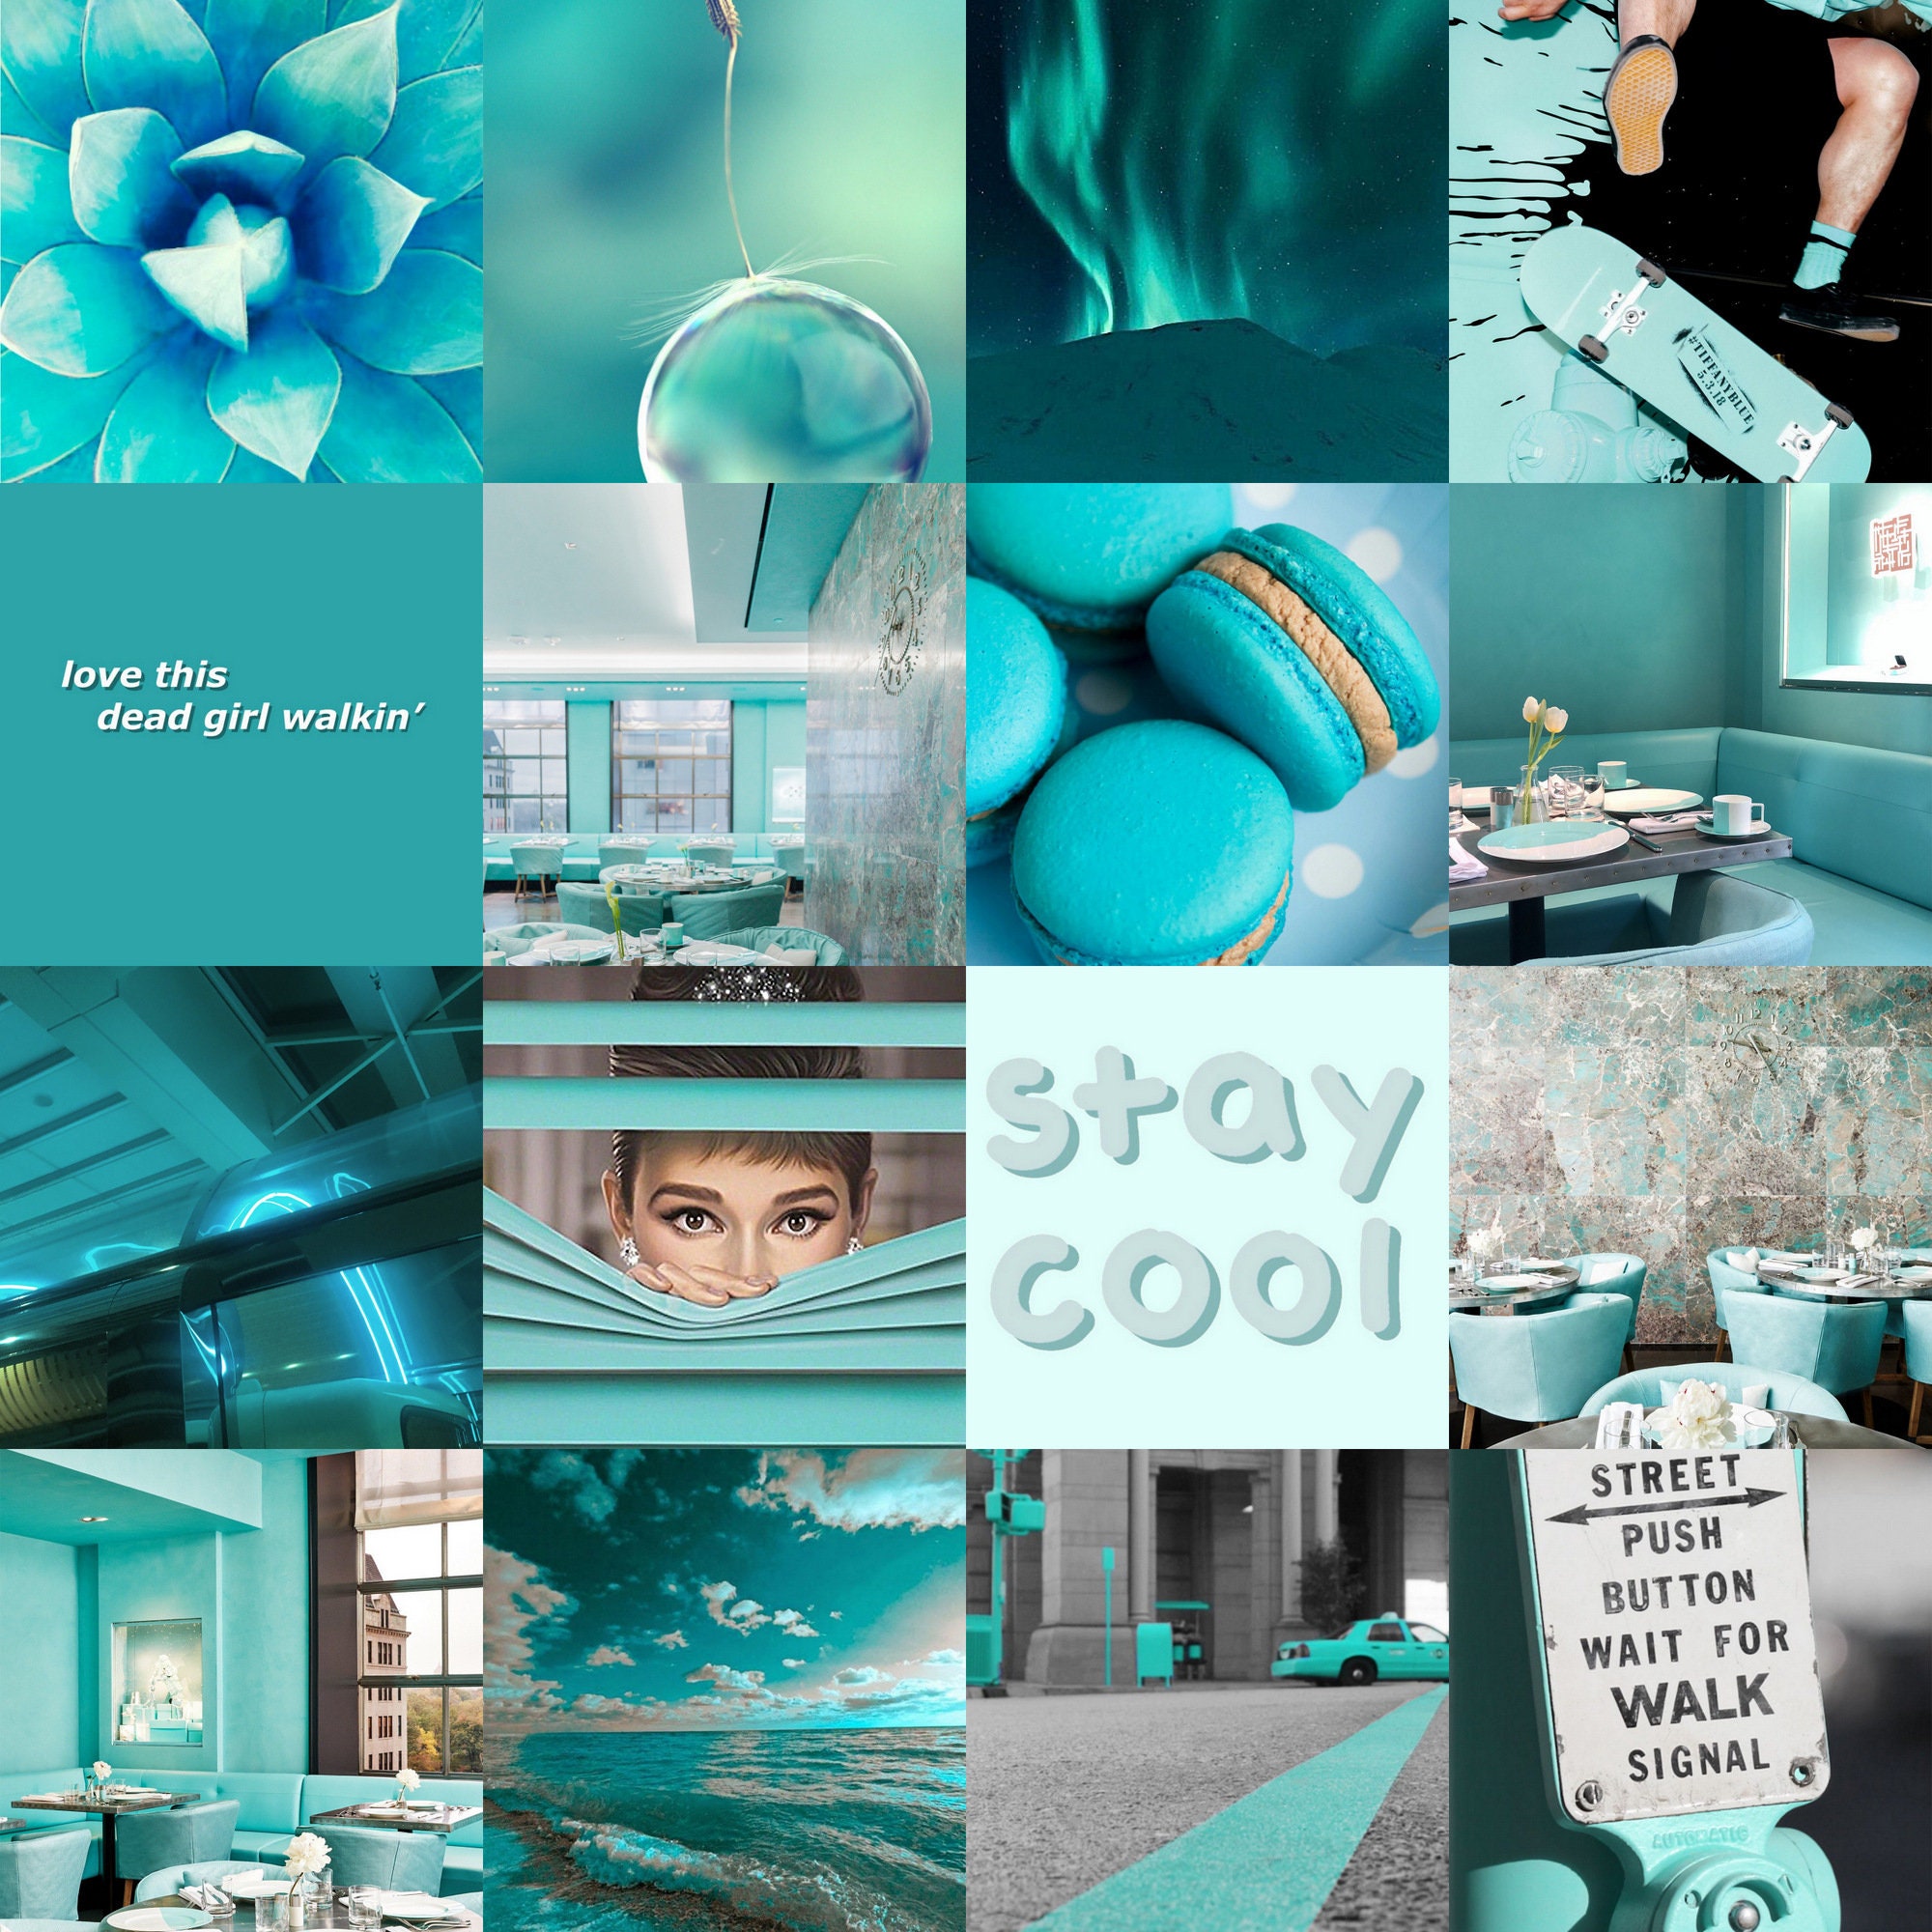 A mood board featuring various teal and blue aesthetic pictures. - Teal, aqua